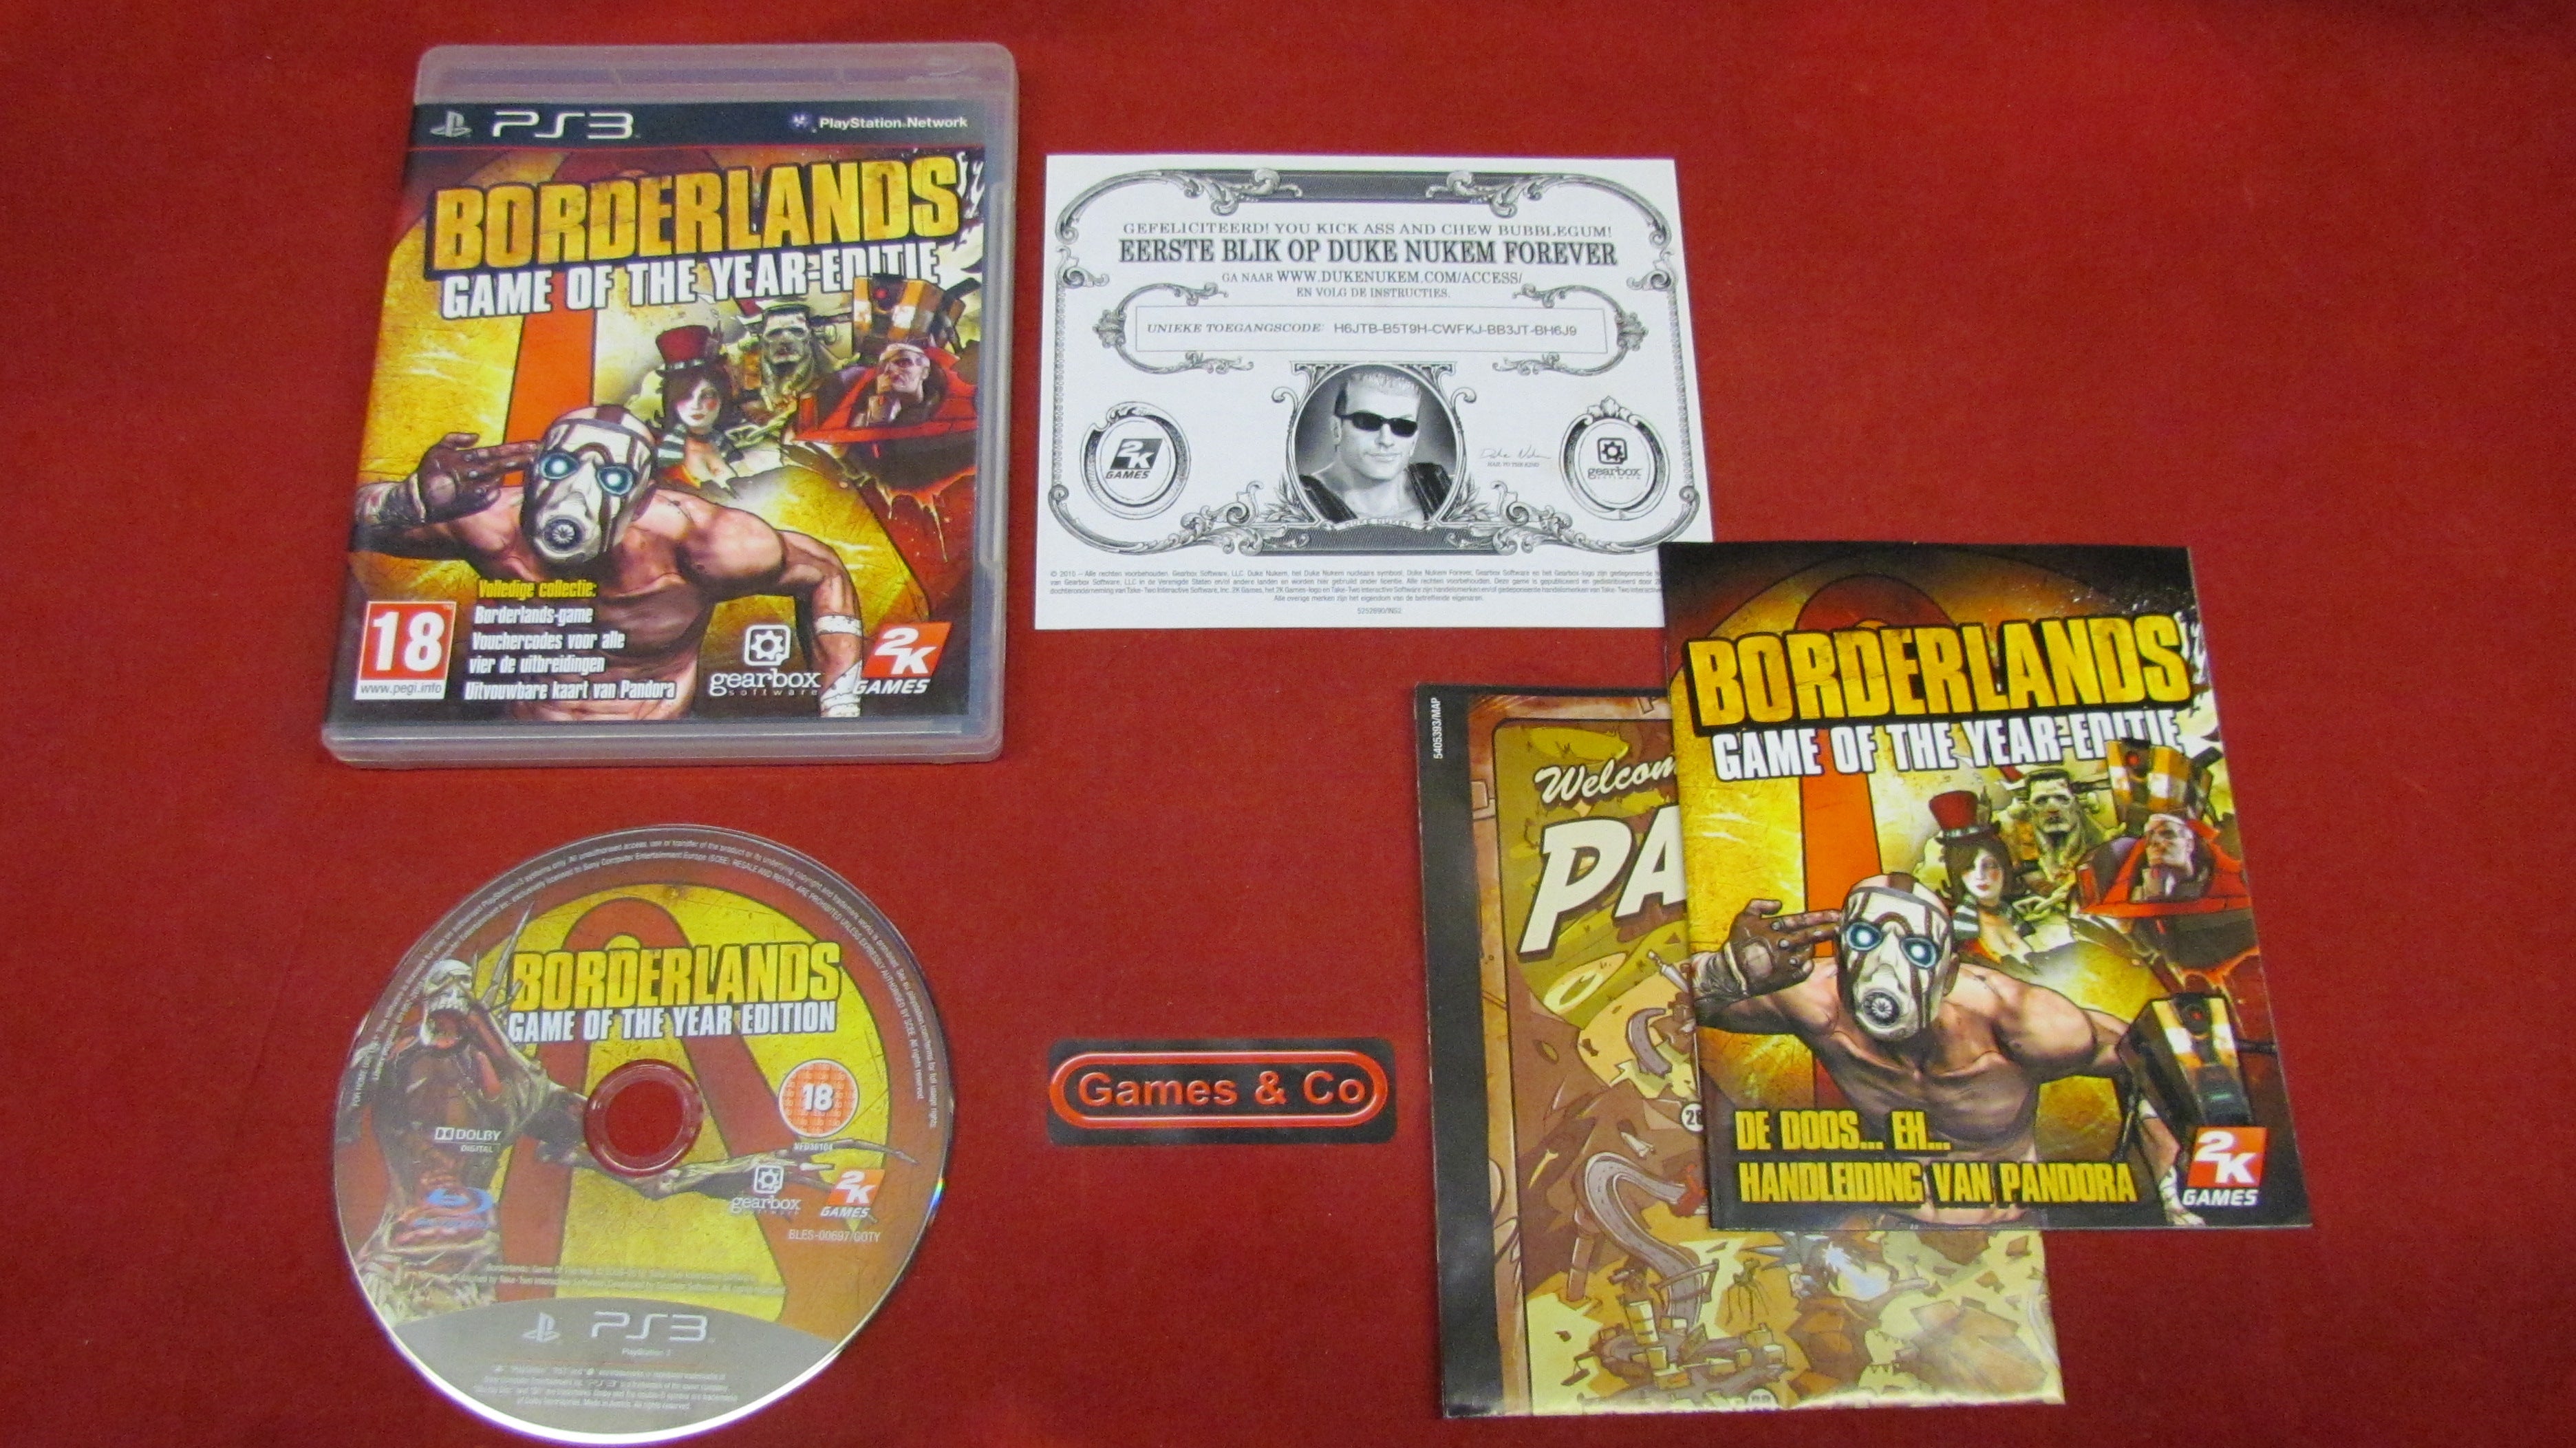 BORDERLANDS GAME OF THE YEAR EDITION